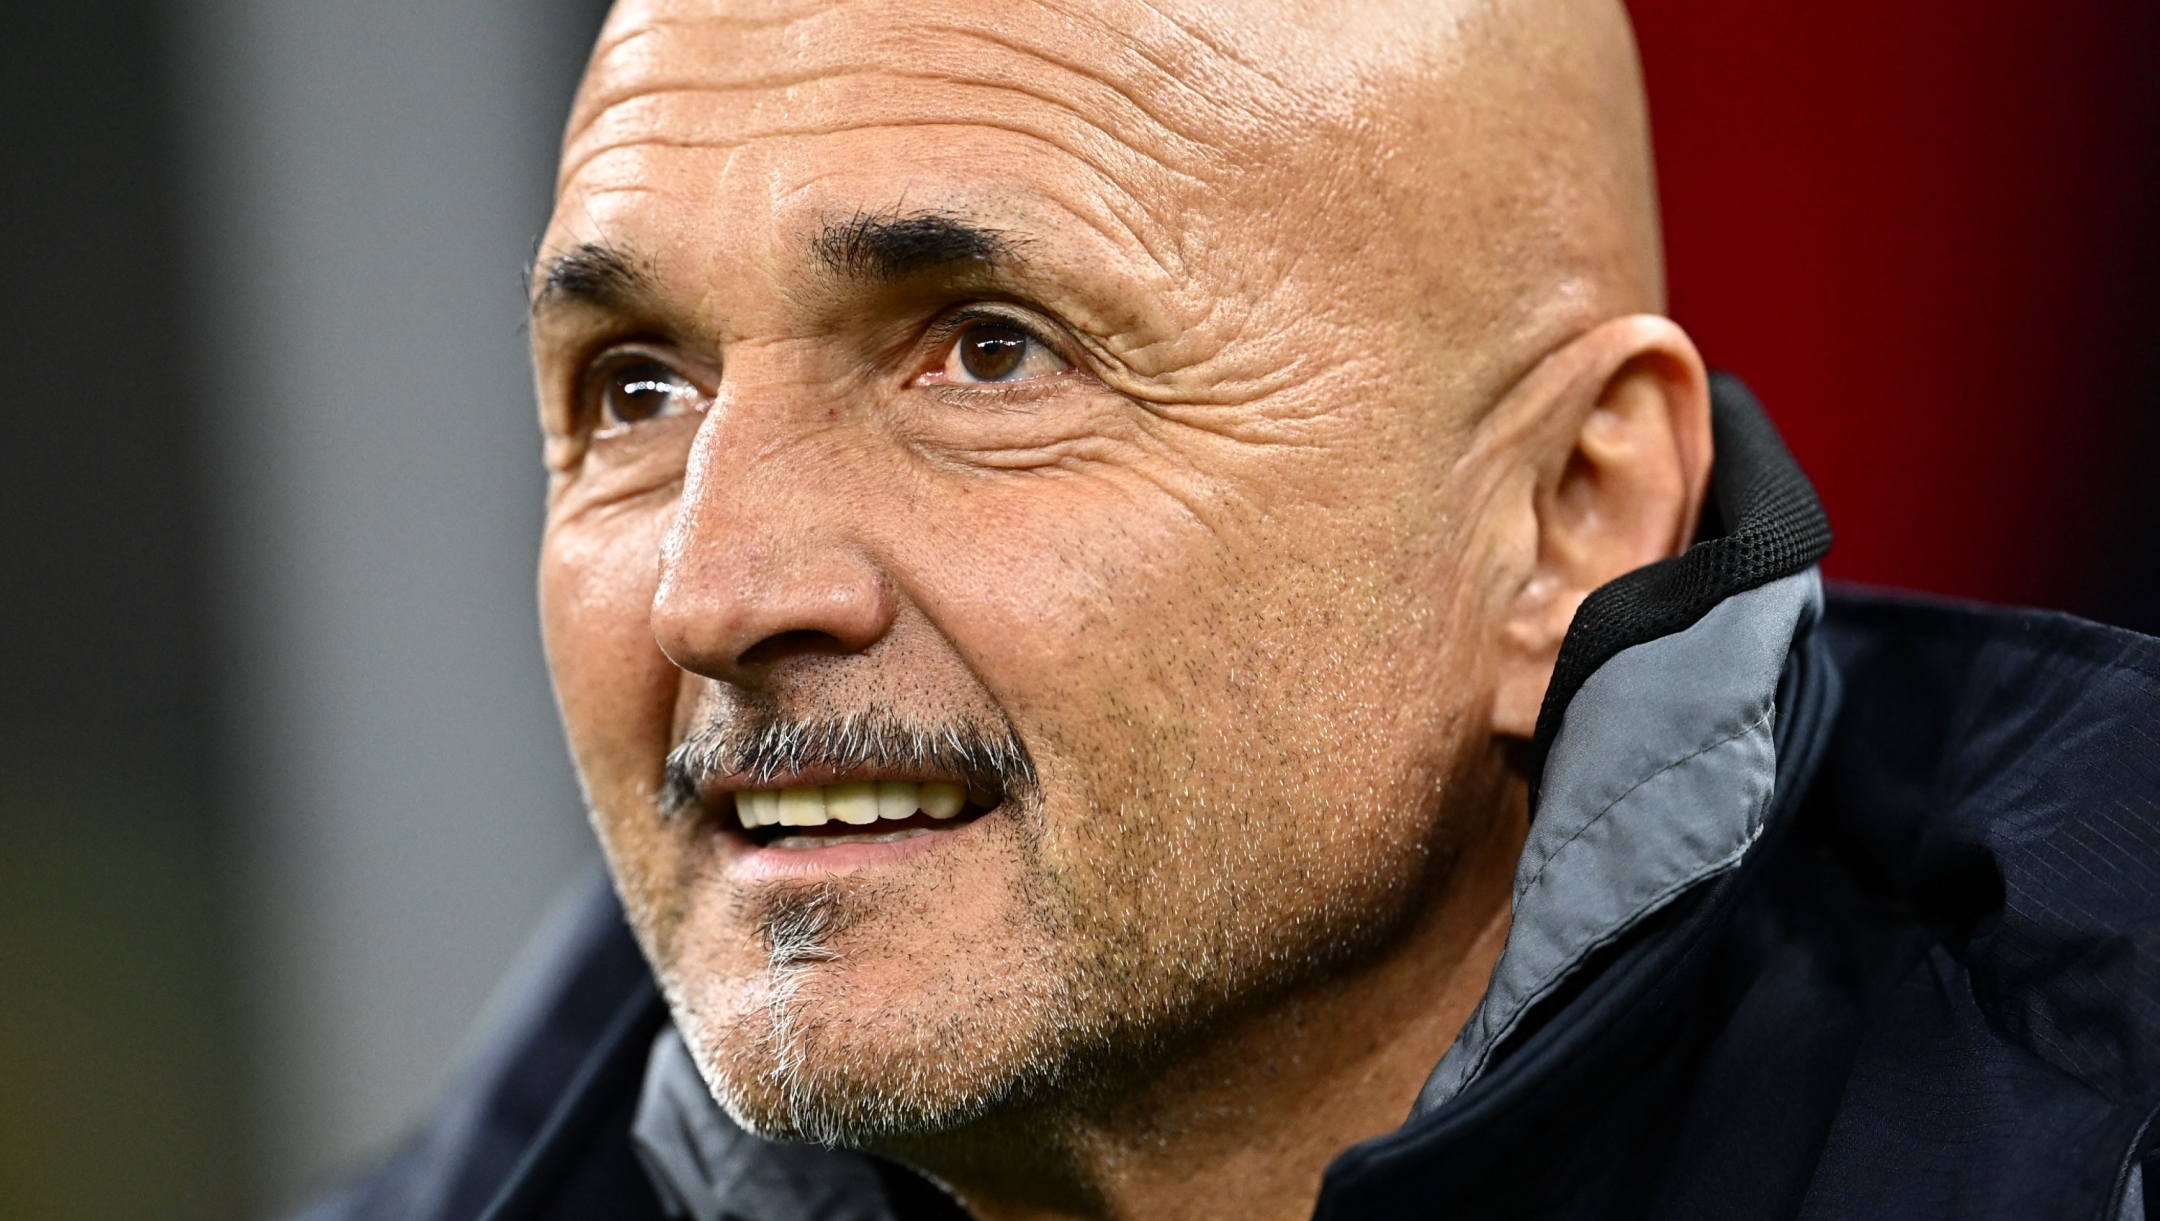 (FILES) Napoli's Italian coach Luciano Spalletti looks on prior to the UEFA Champions League quarter-finals first leg football match between AC Milan and SSC Napoli on April 12, 2023 at the San Siro stadium in Milan. Luciano Spalletti, who led Napoli to the Serie A title last season, has been appointed coach of European champions Italy, the Italian football federation (FIGC) announced on August 18, 2023. (Photo by GABRIEL BOUYS / AFP)